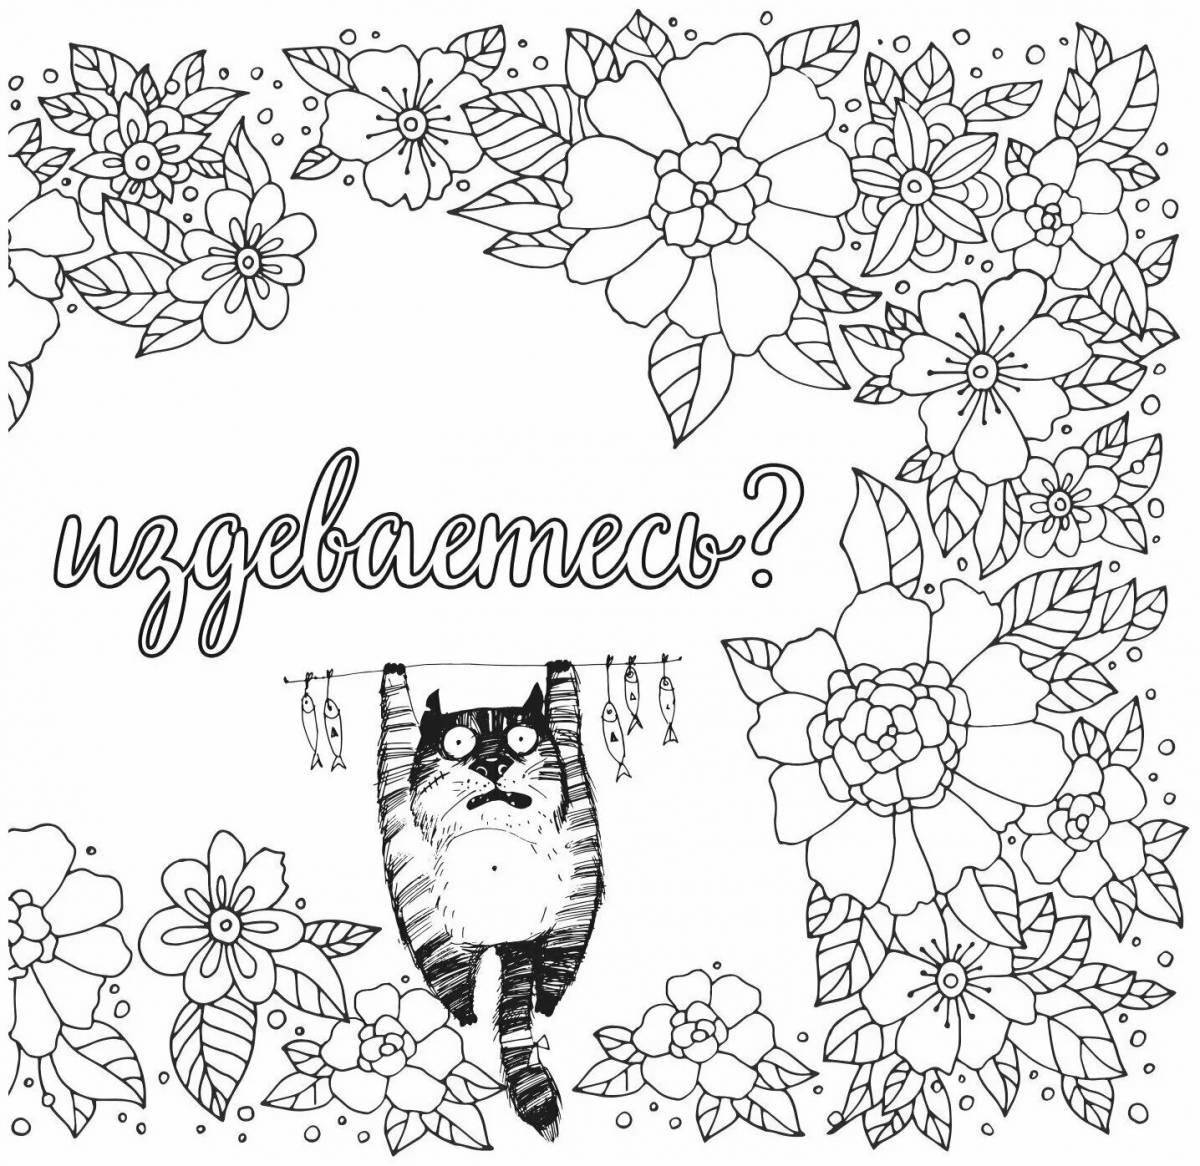 Color-filled color-mania you annoy me coloring page